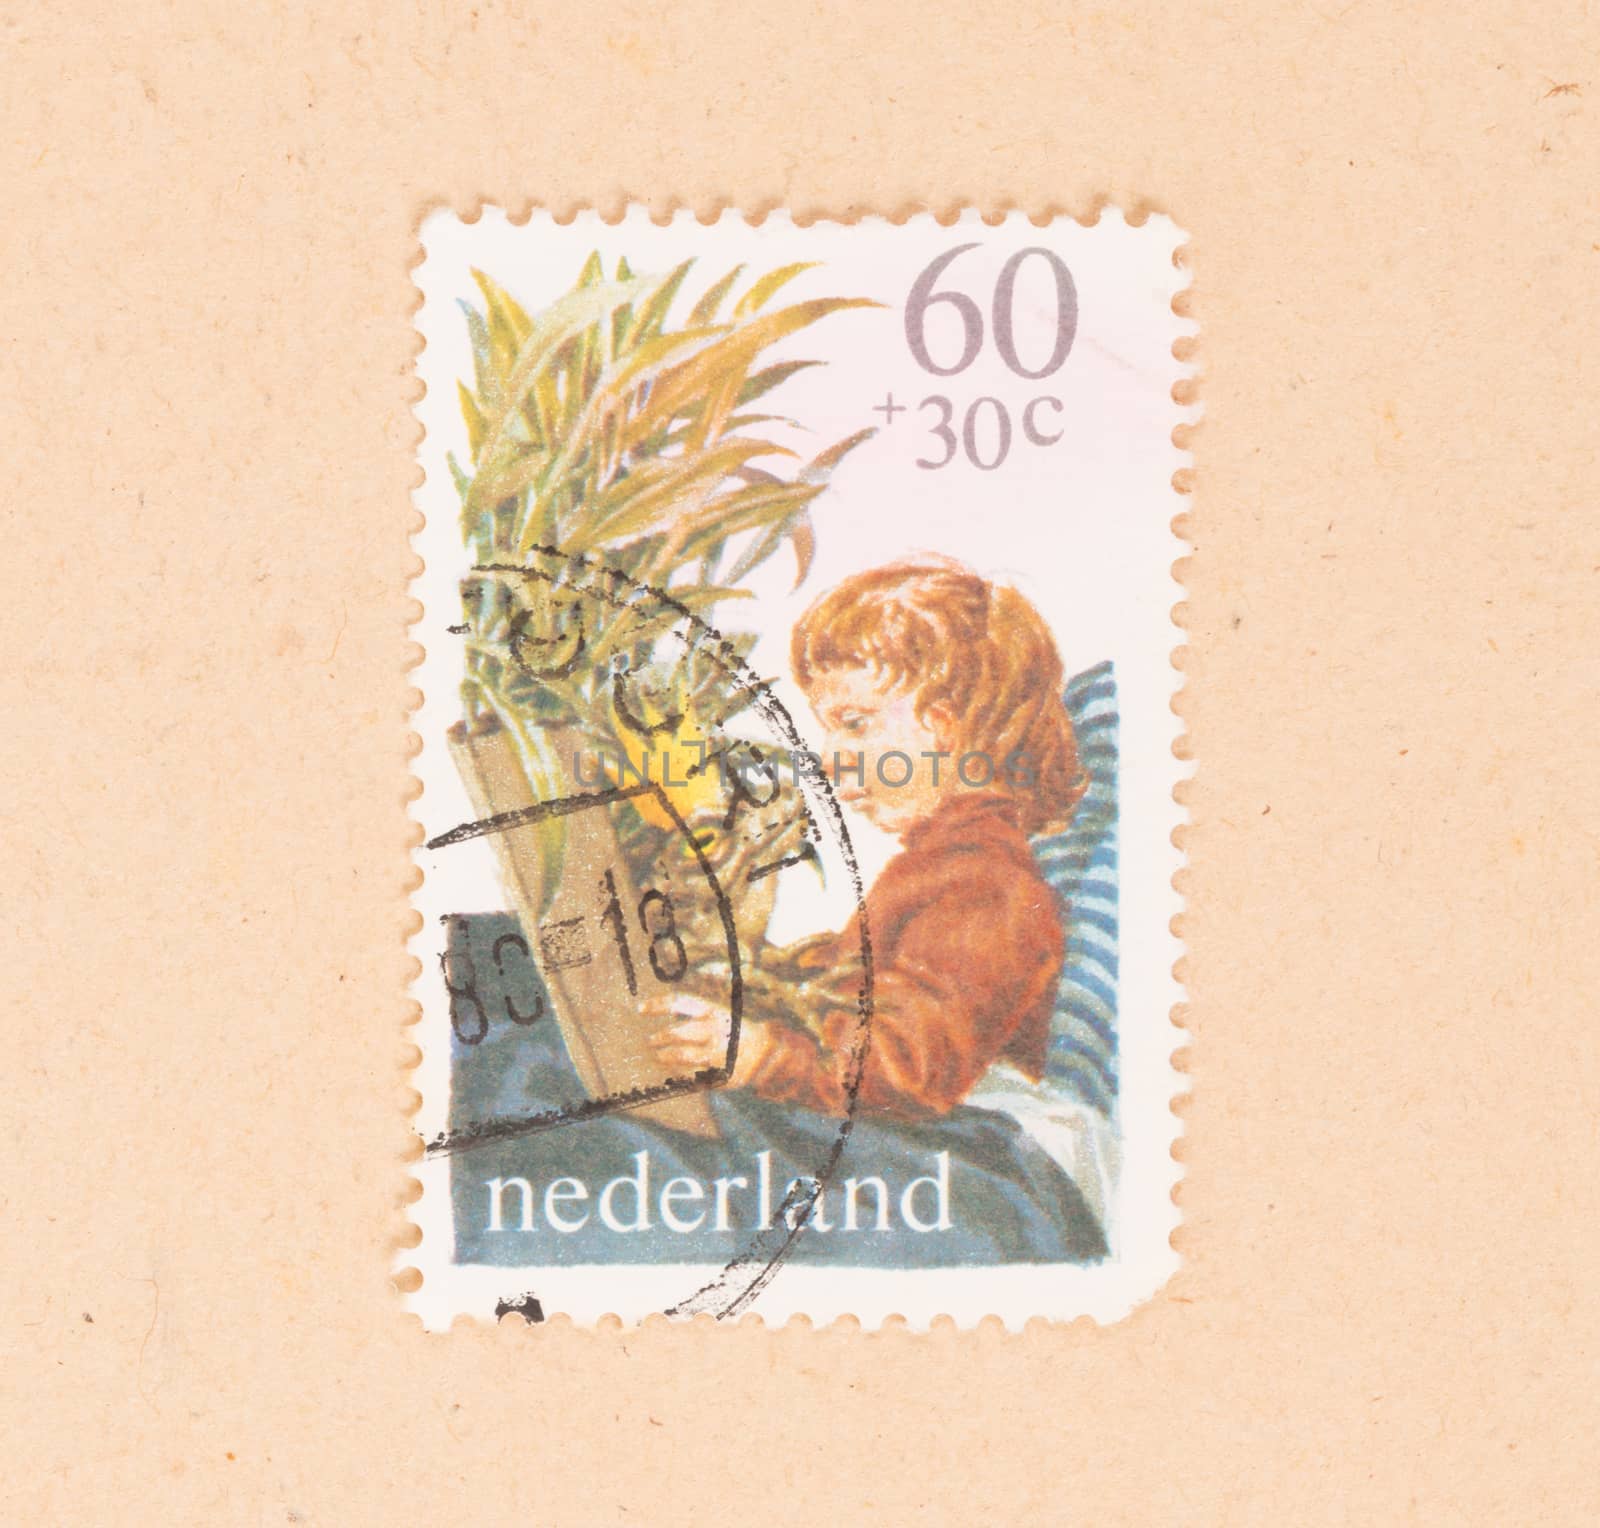 THE NETHERLANDS 1980: A stamp printed in the Netherlands shows a by michaklootwijk